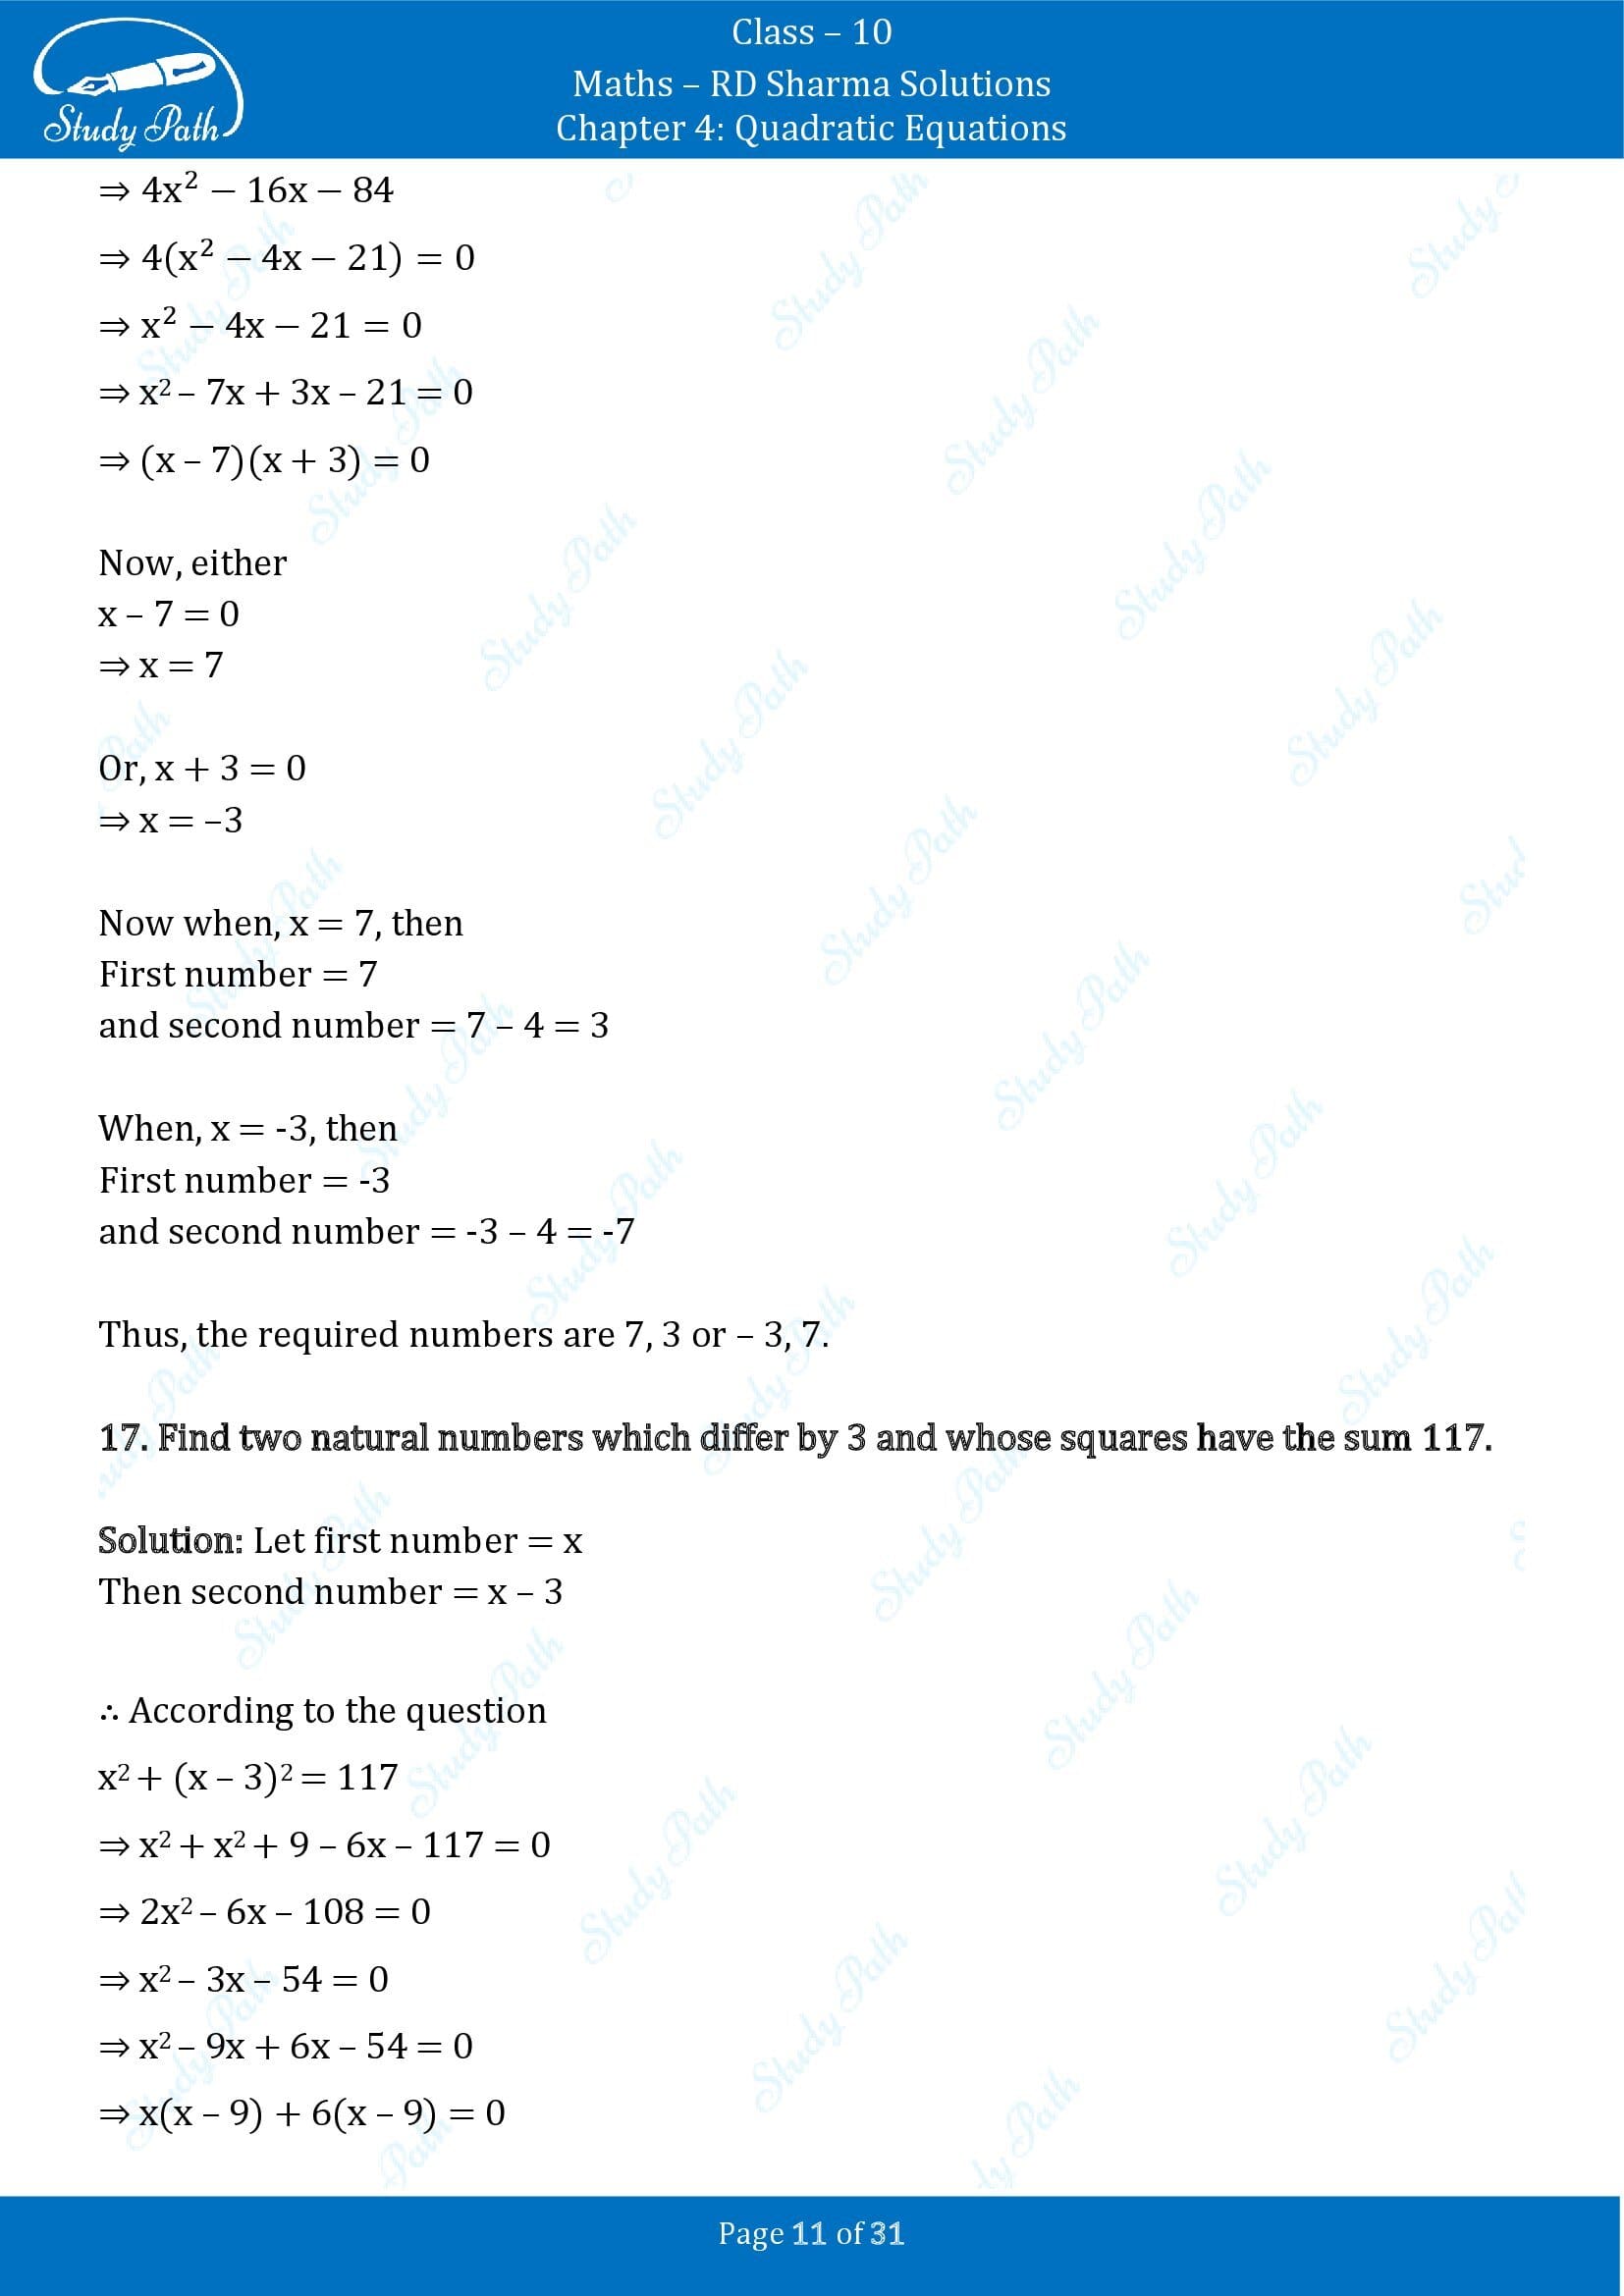 RD Sharma Solutions Class 10 Chapter 4 Quadratic Equations Exercise 4.7 00011